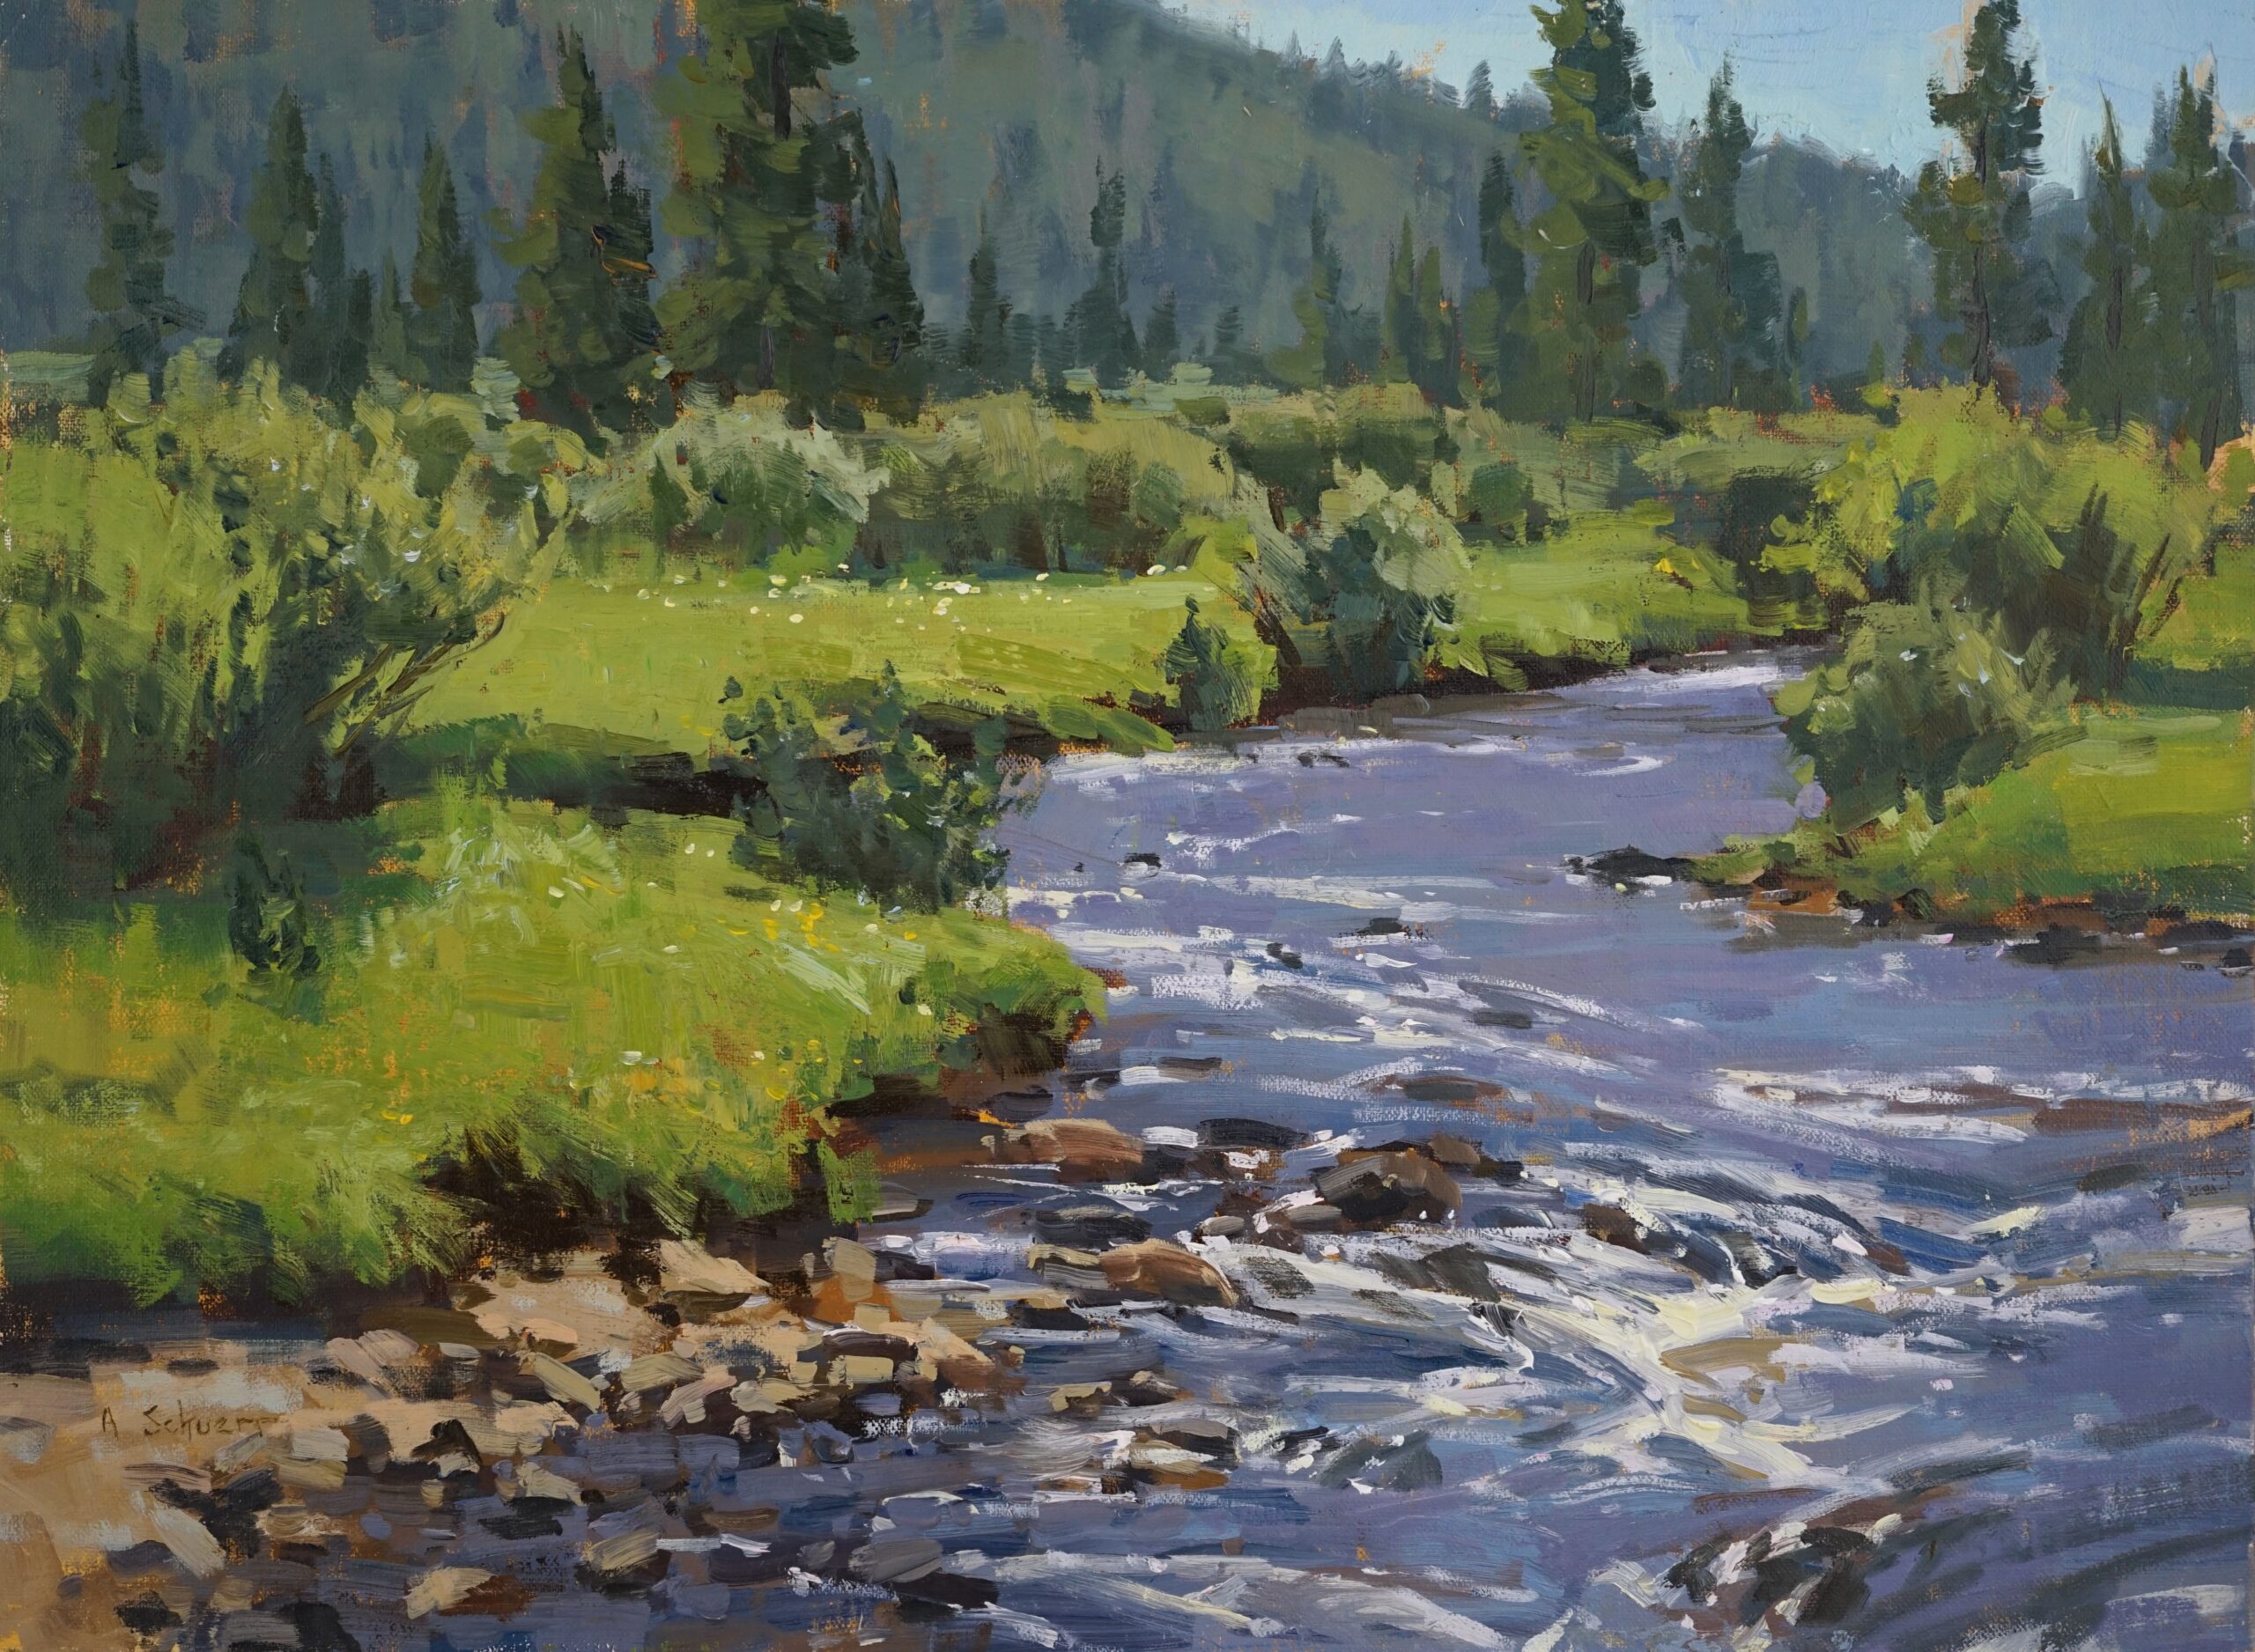 painting of a mountain stream reflecting the sunlight, cutting through banks of rich green grass.